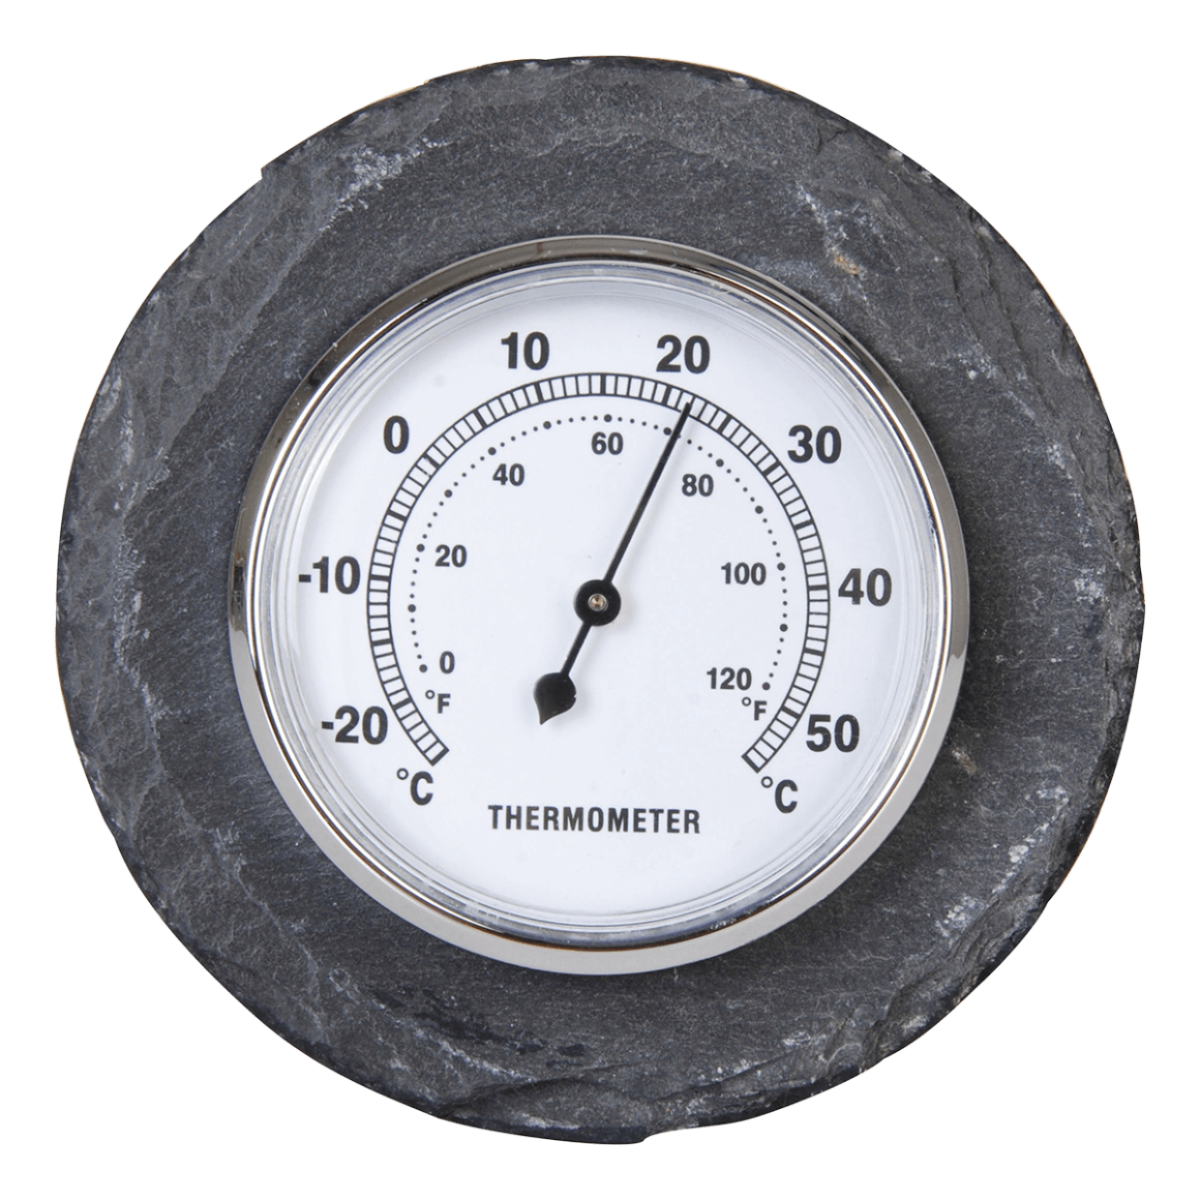 Thermometer rond leisteen / Outhings